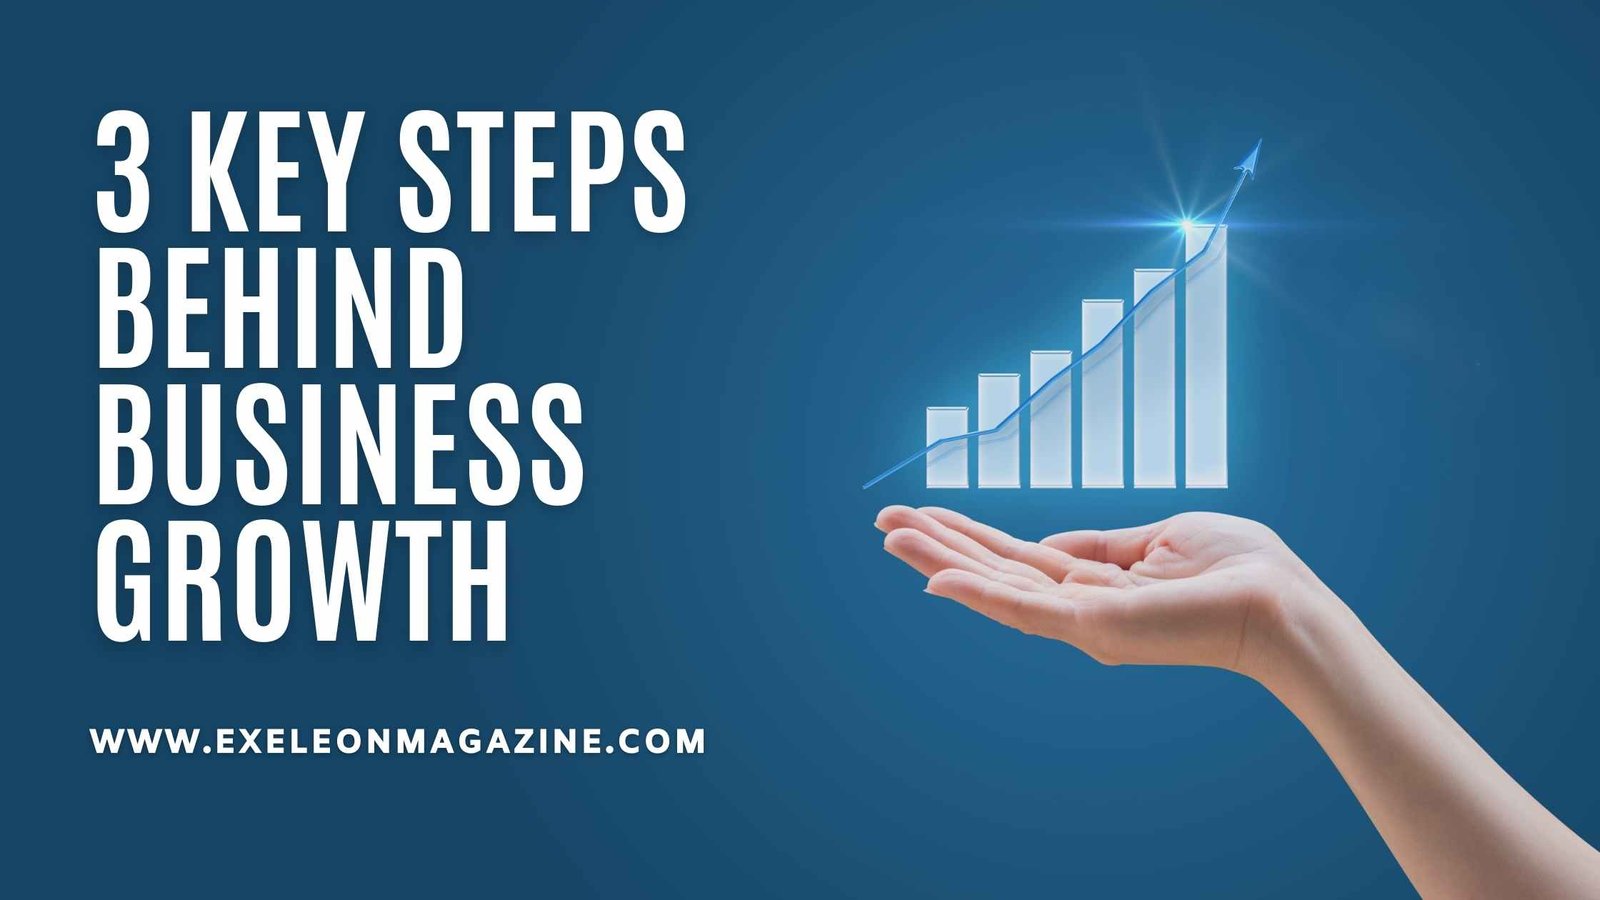 3 Key Steps Behind Business Growth